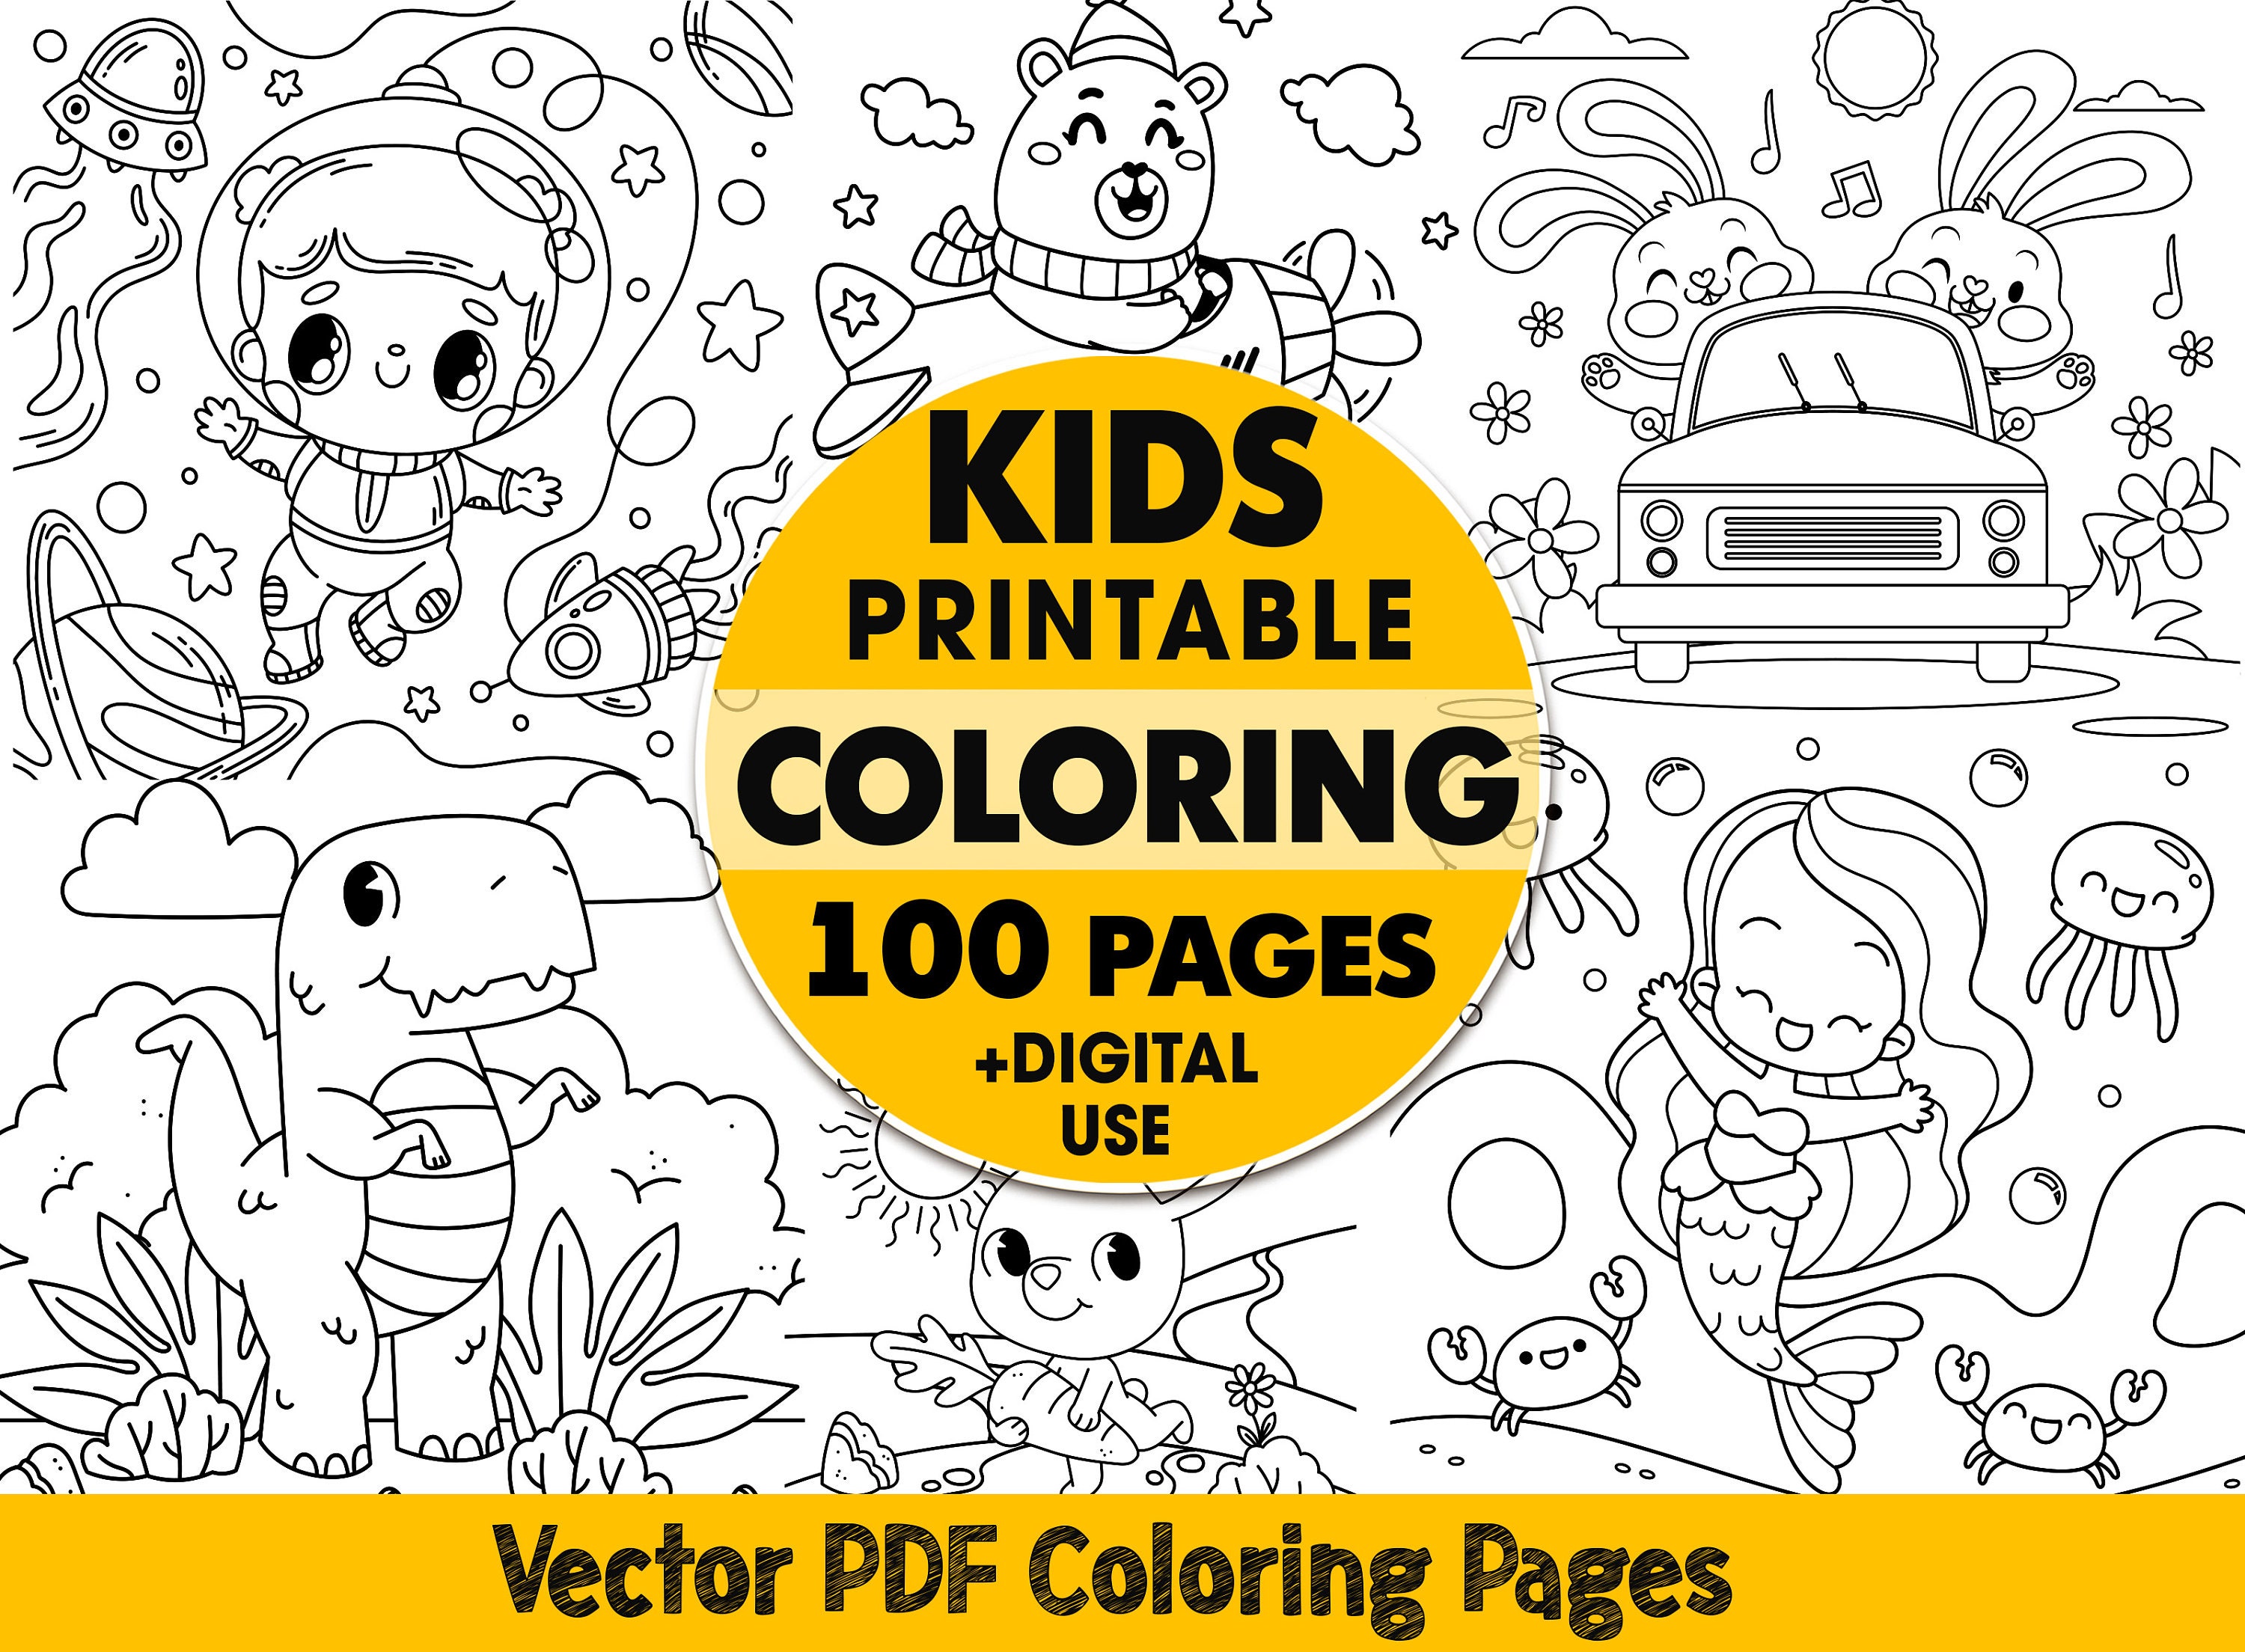 Coloring pages for kids printable digital coloring book pdf coloring pages for kids kids coloring book digital animal coloring sheets